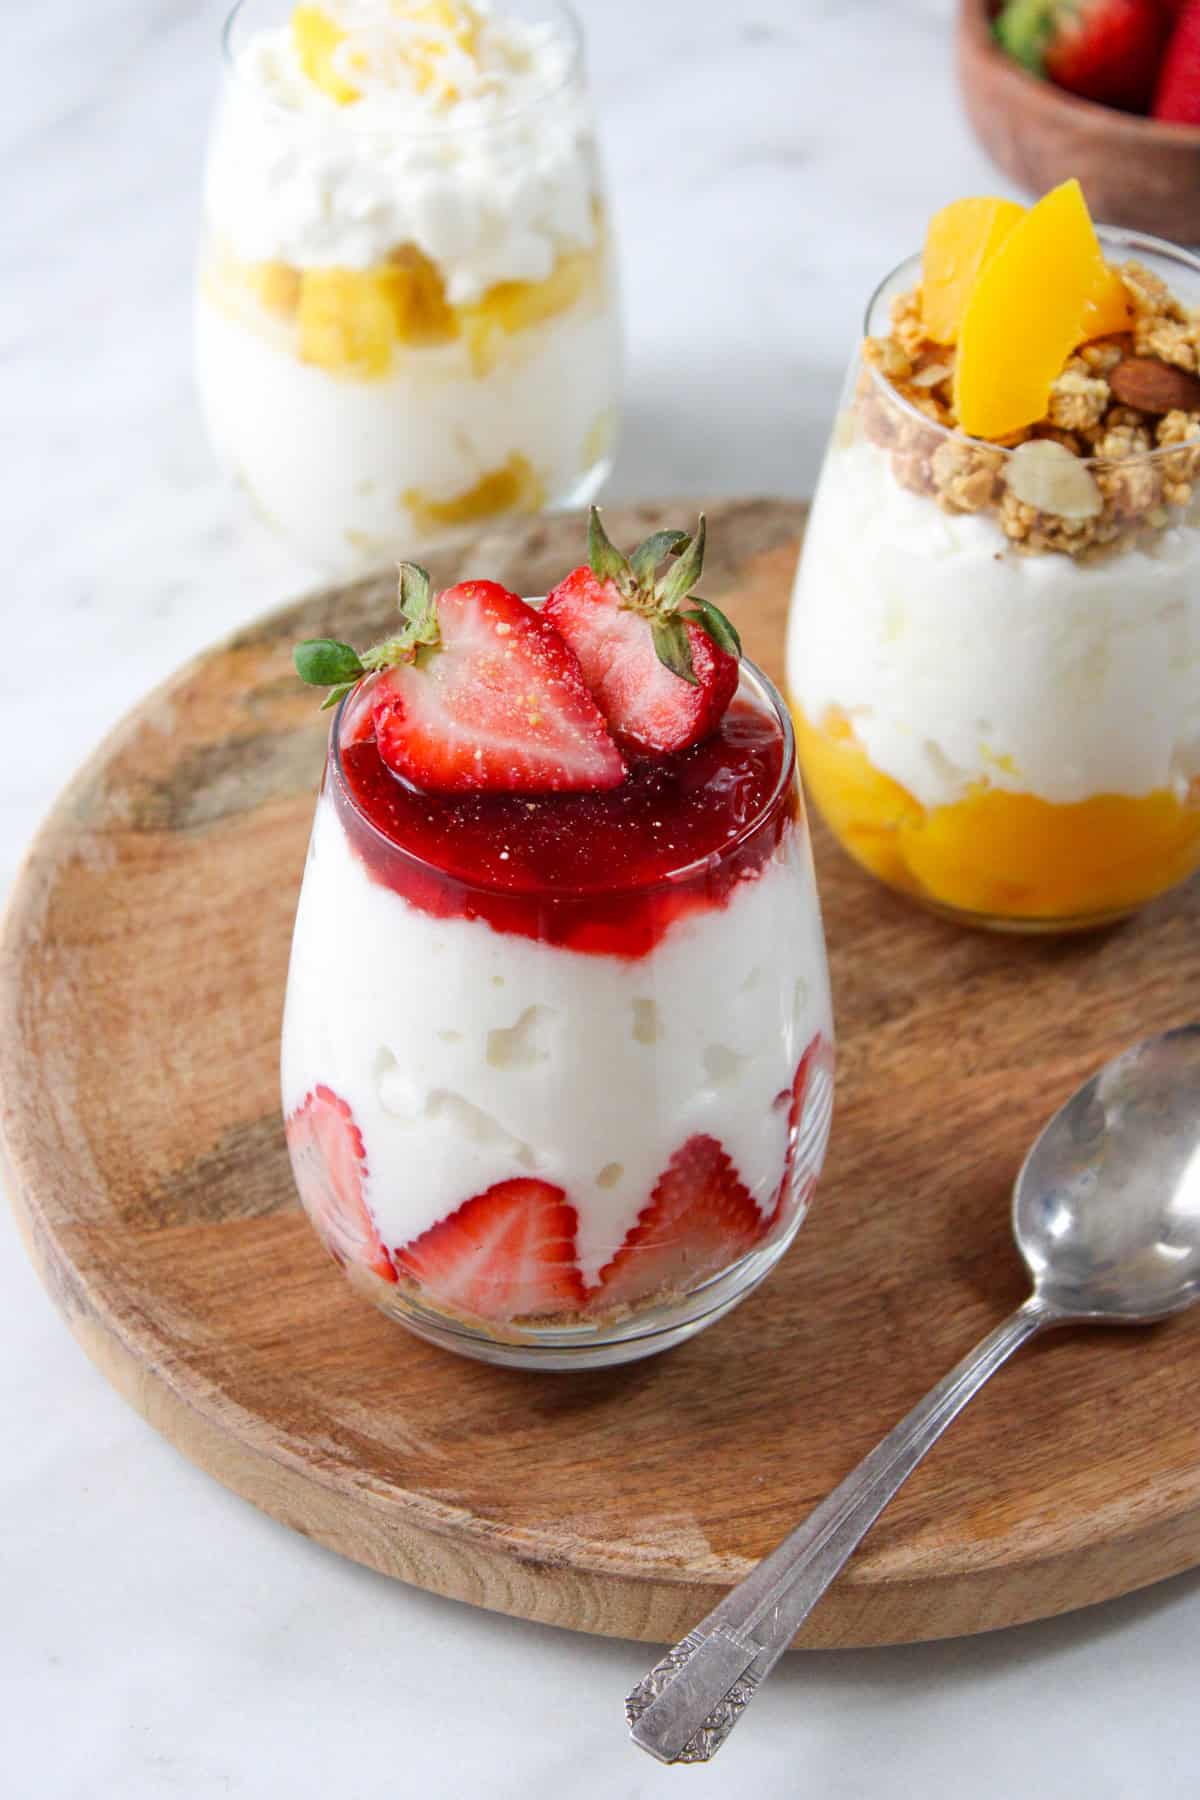 three variations of cottage cheese parfaits with fruit on a wooden platter and marble countertop with a metal spoon